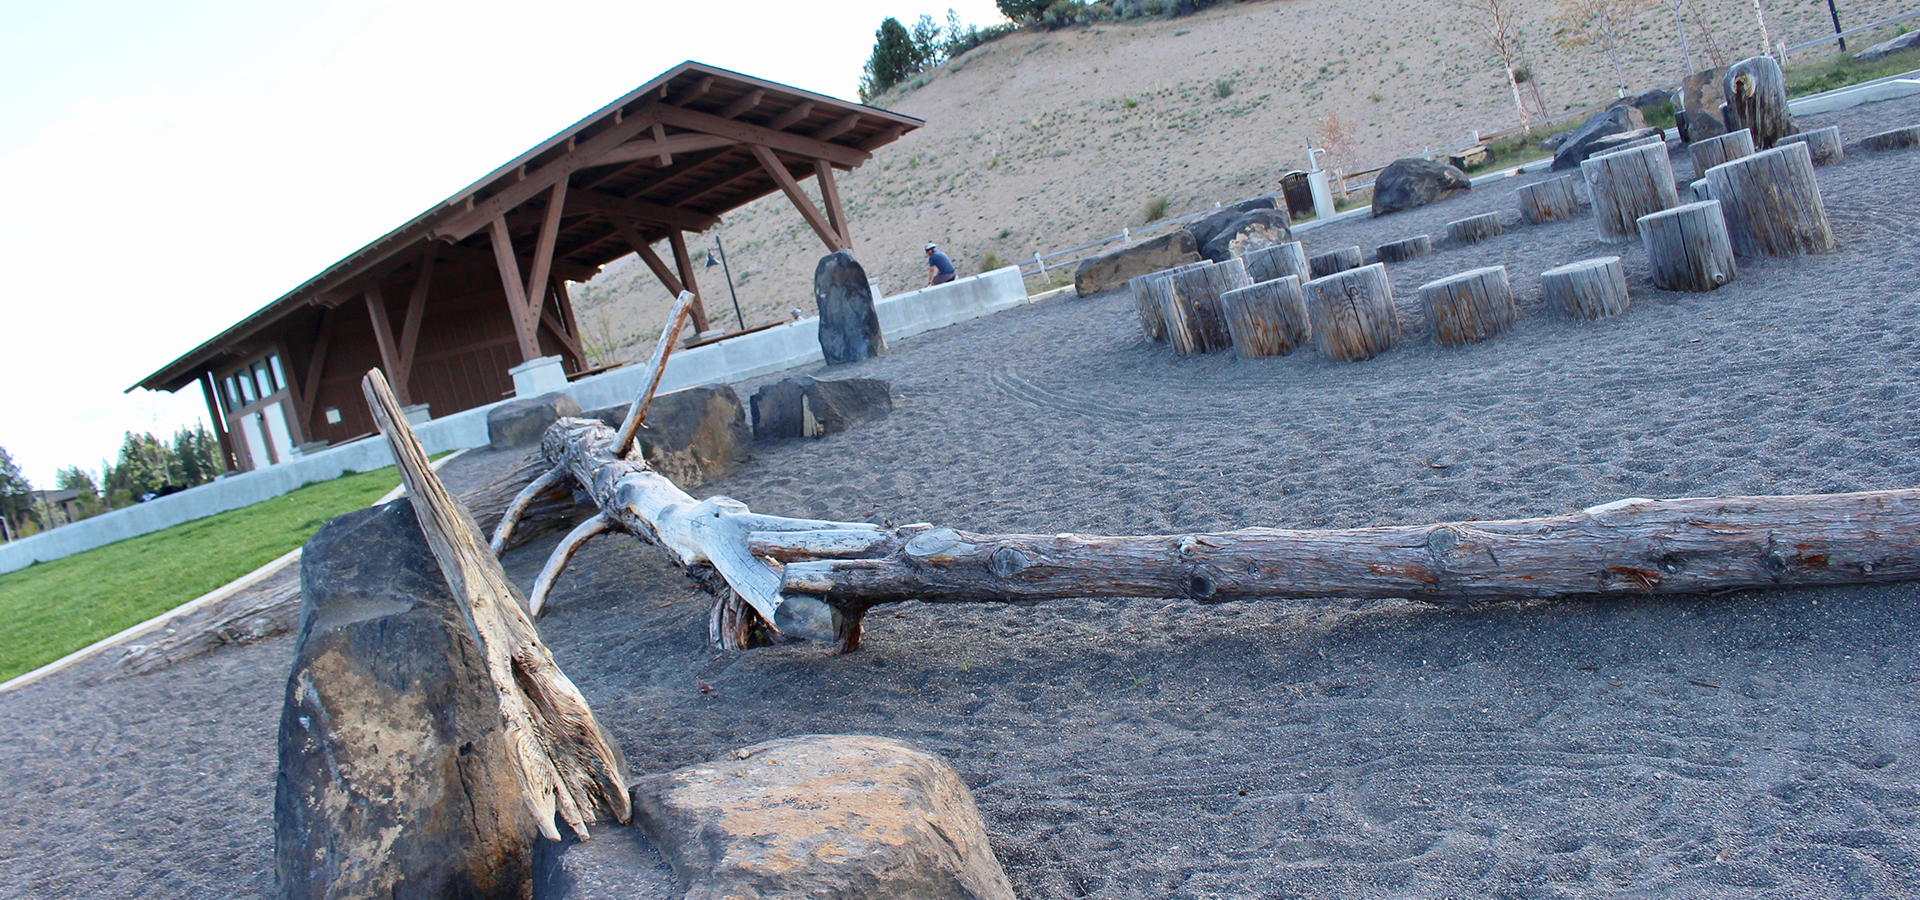 The natural play area at Discovery Park.